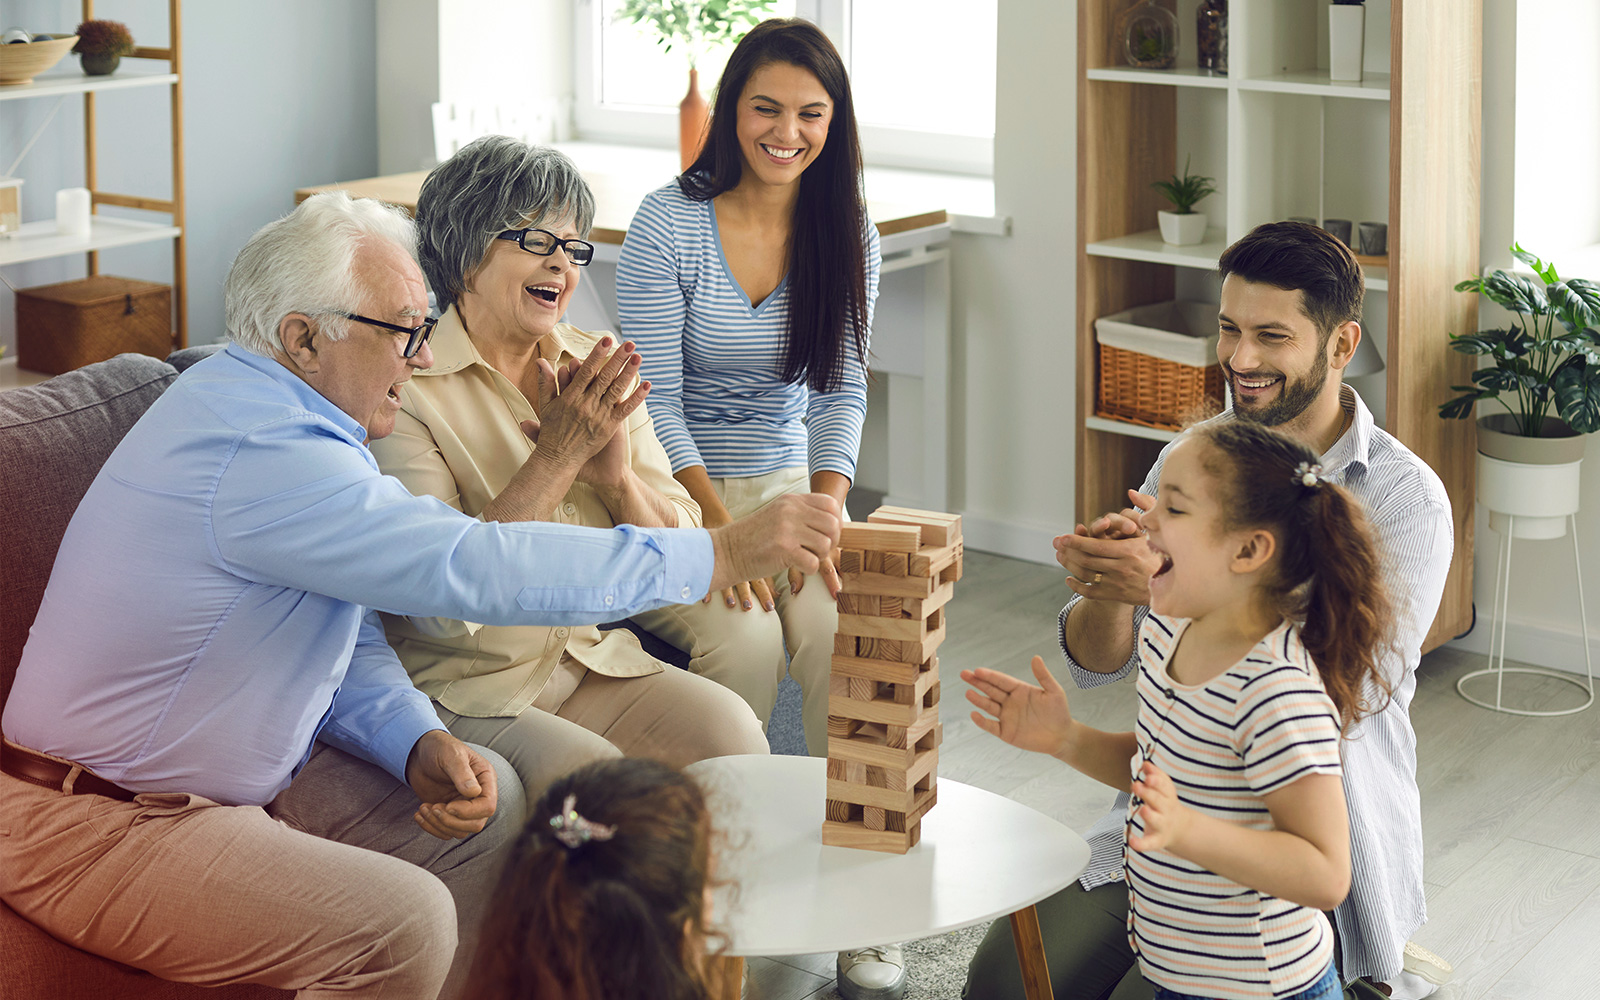 Family with children playing board games and having a good time together